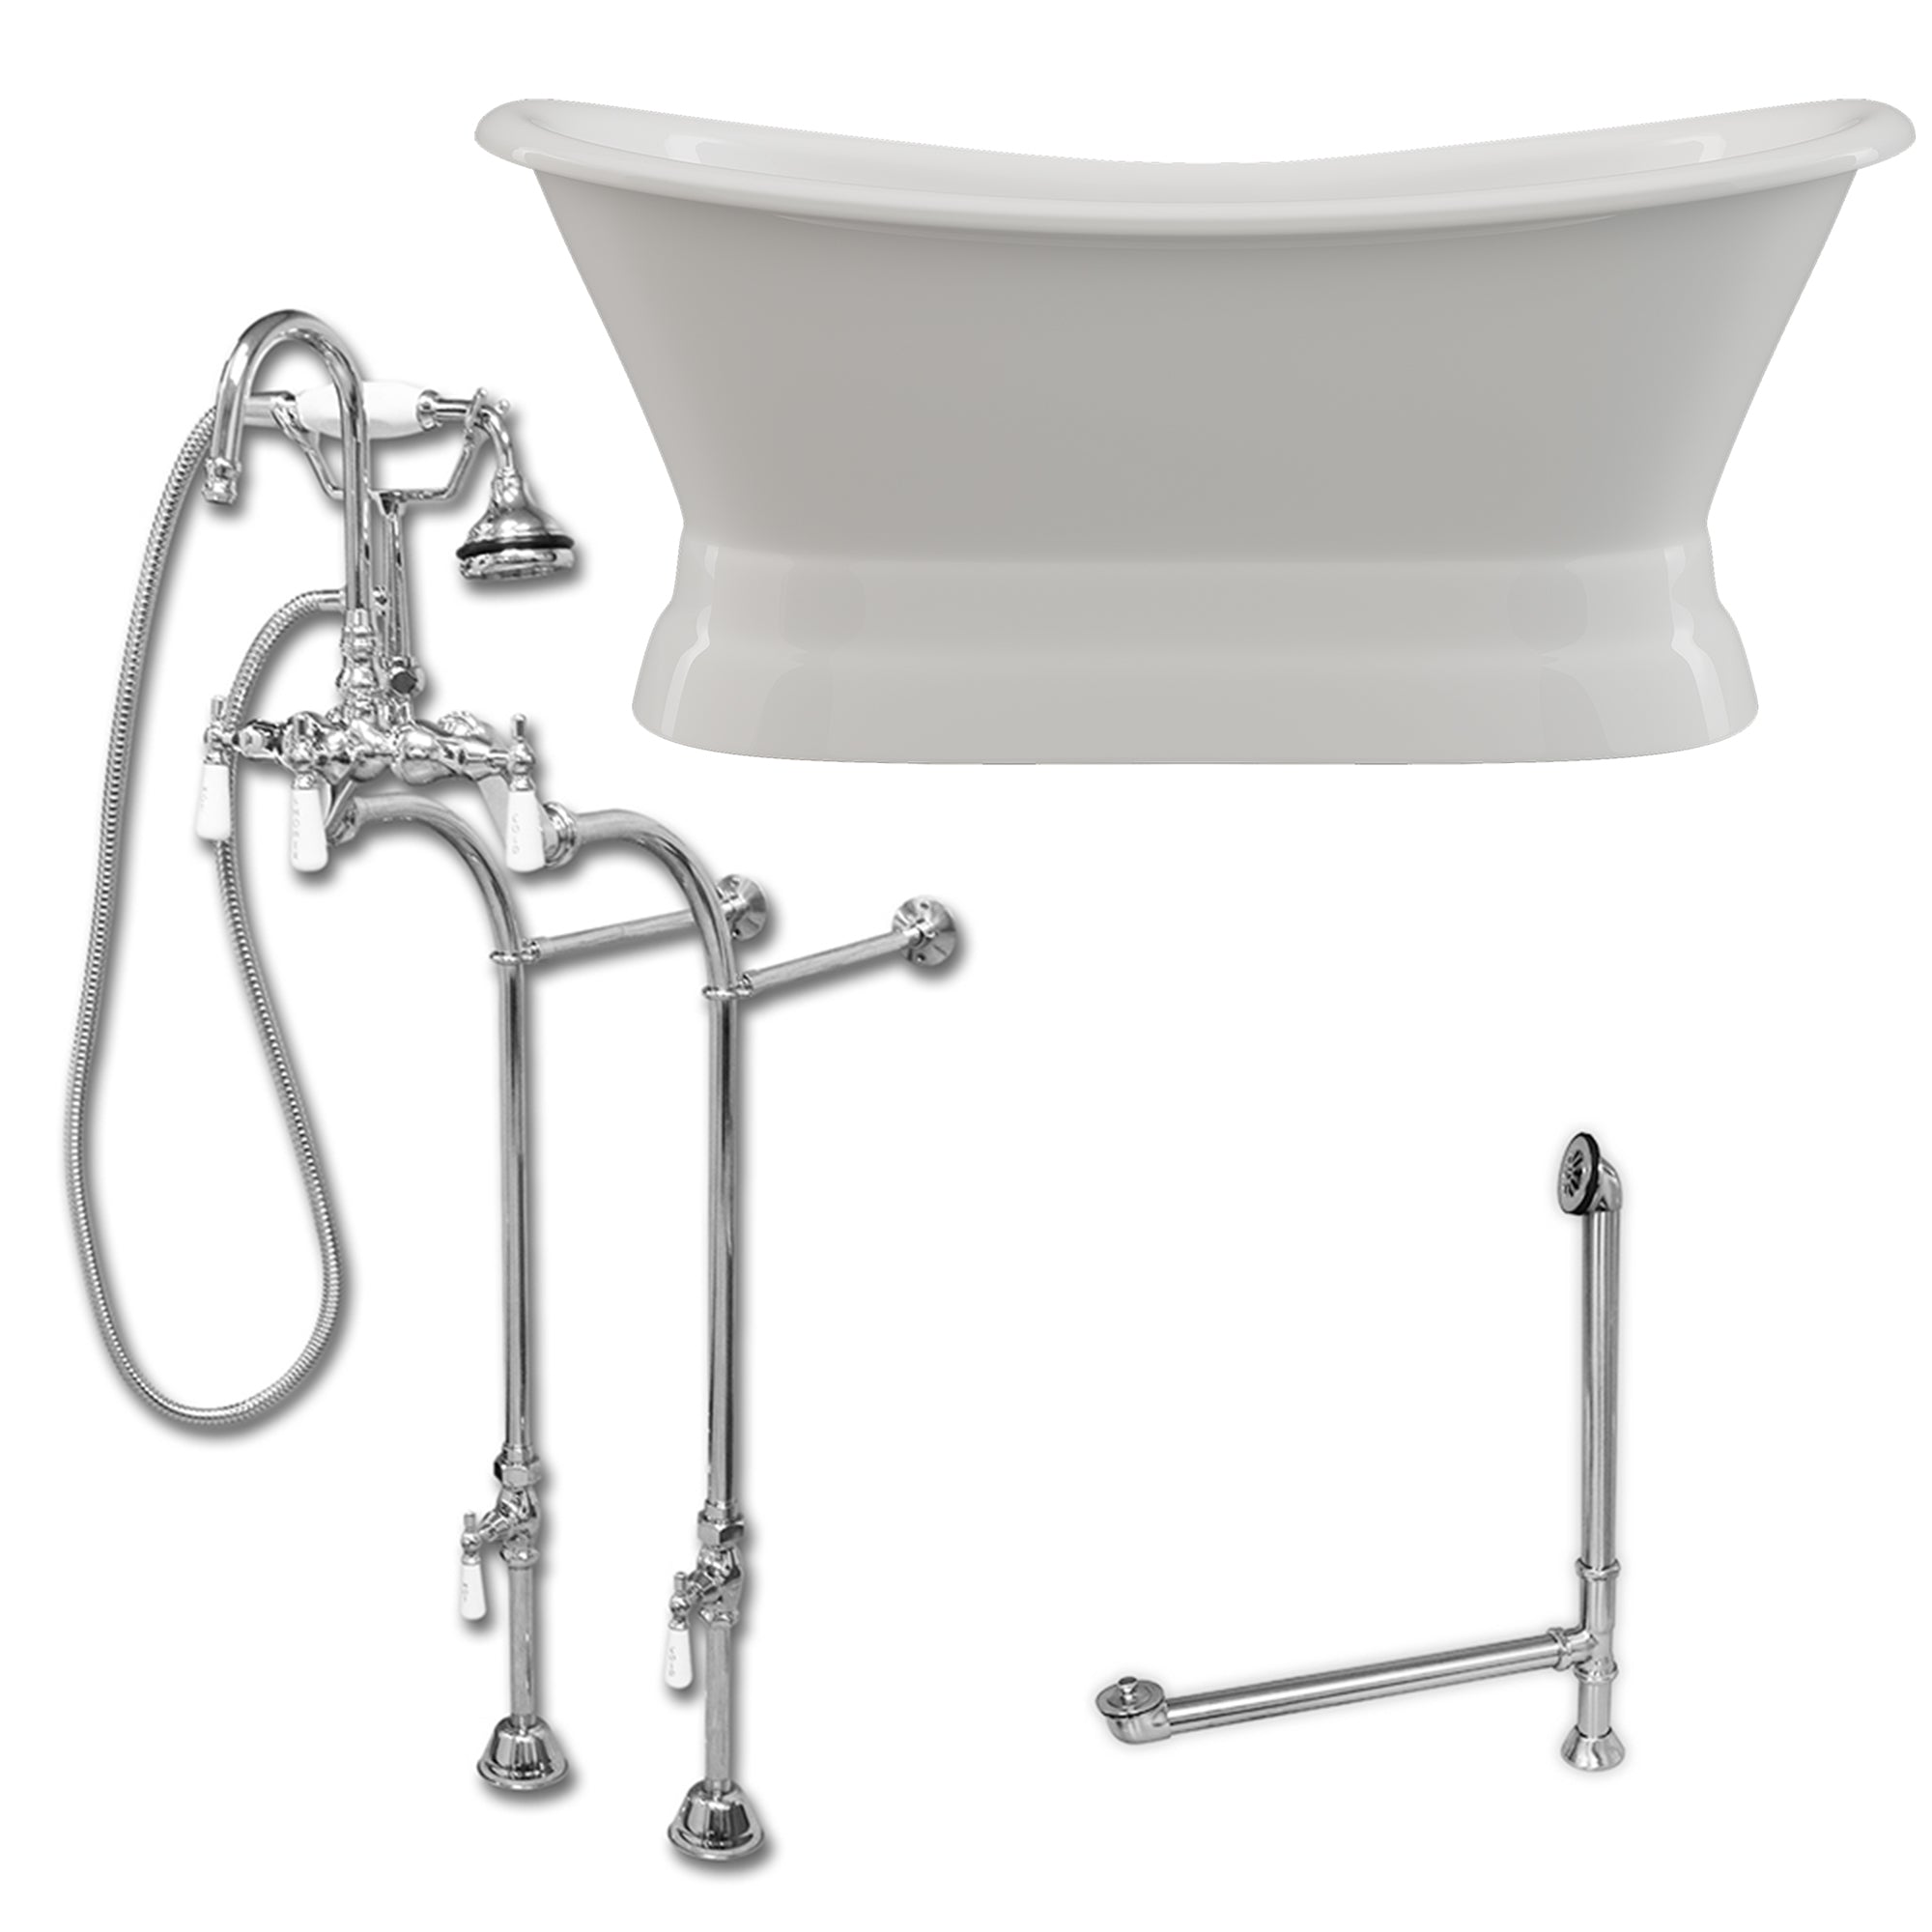 Cambridge Plumbing Double Slipper Cast Iron Pedestal Soaking Tub (Porcelain interior and white paint exterior) and Free-standing Plumbing Package (Brushed nickel) DES-PED-398684-PKG-NH - Vital Hydrotherapy